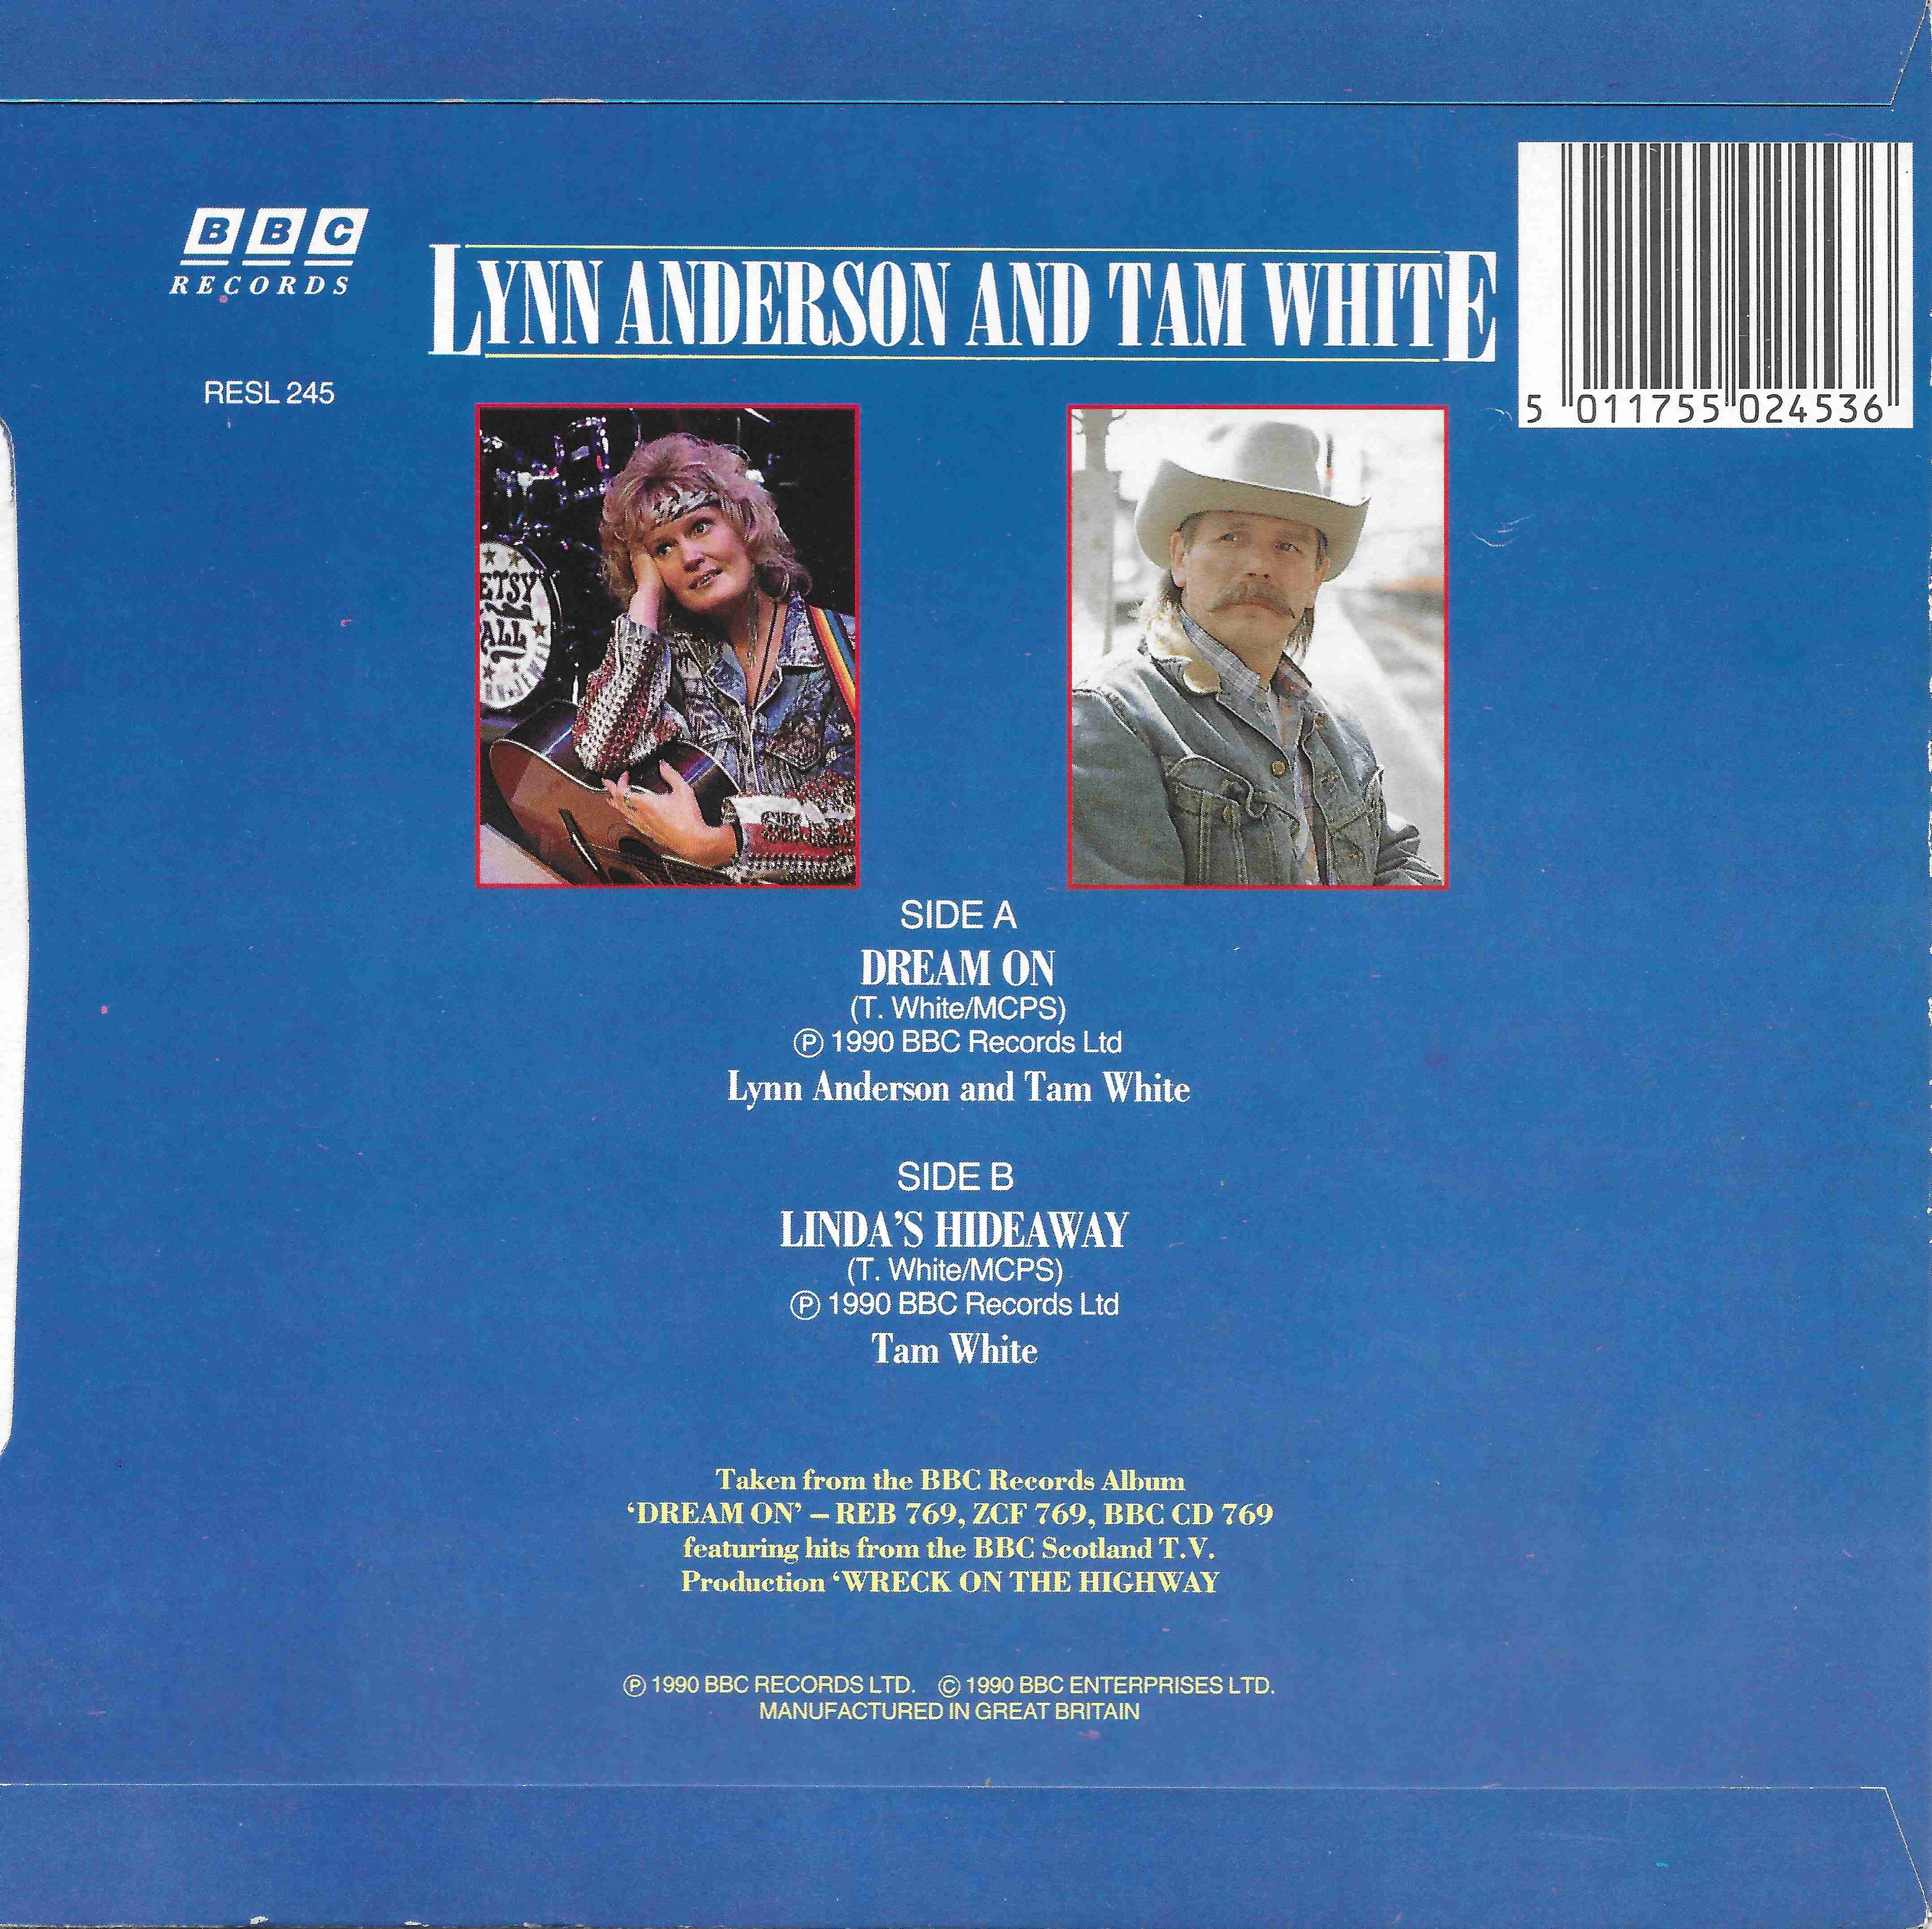 Picture of RESL 245 Dream on by artist Lynn Anderson / Tam White from the BBC records and Tapes library